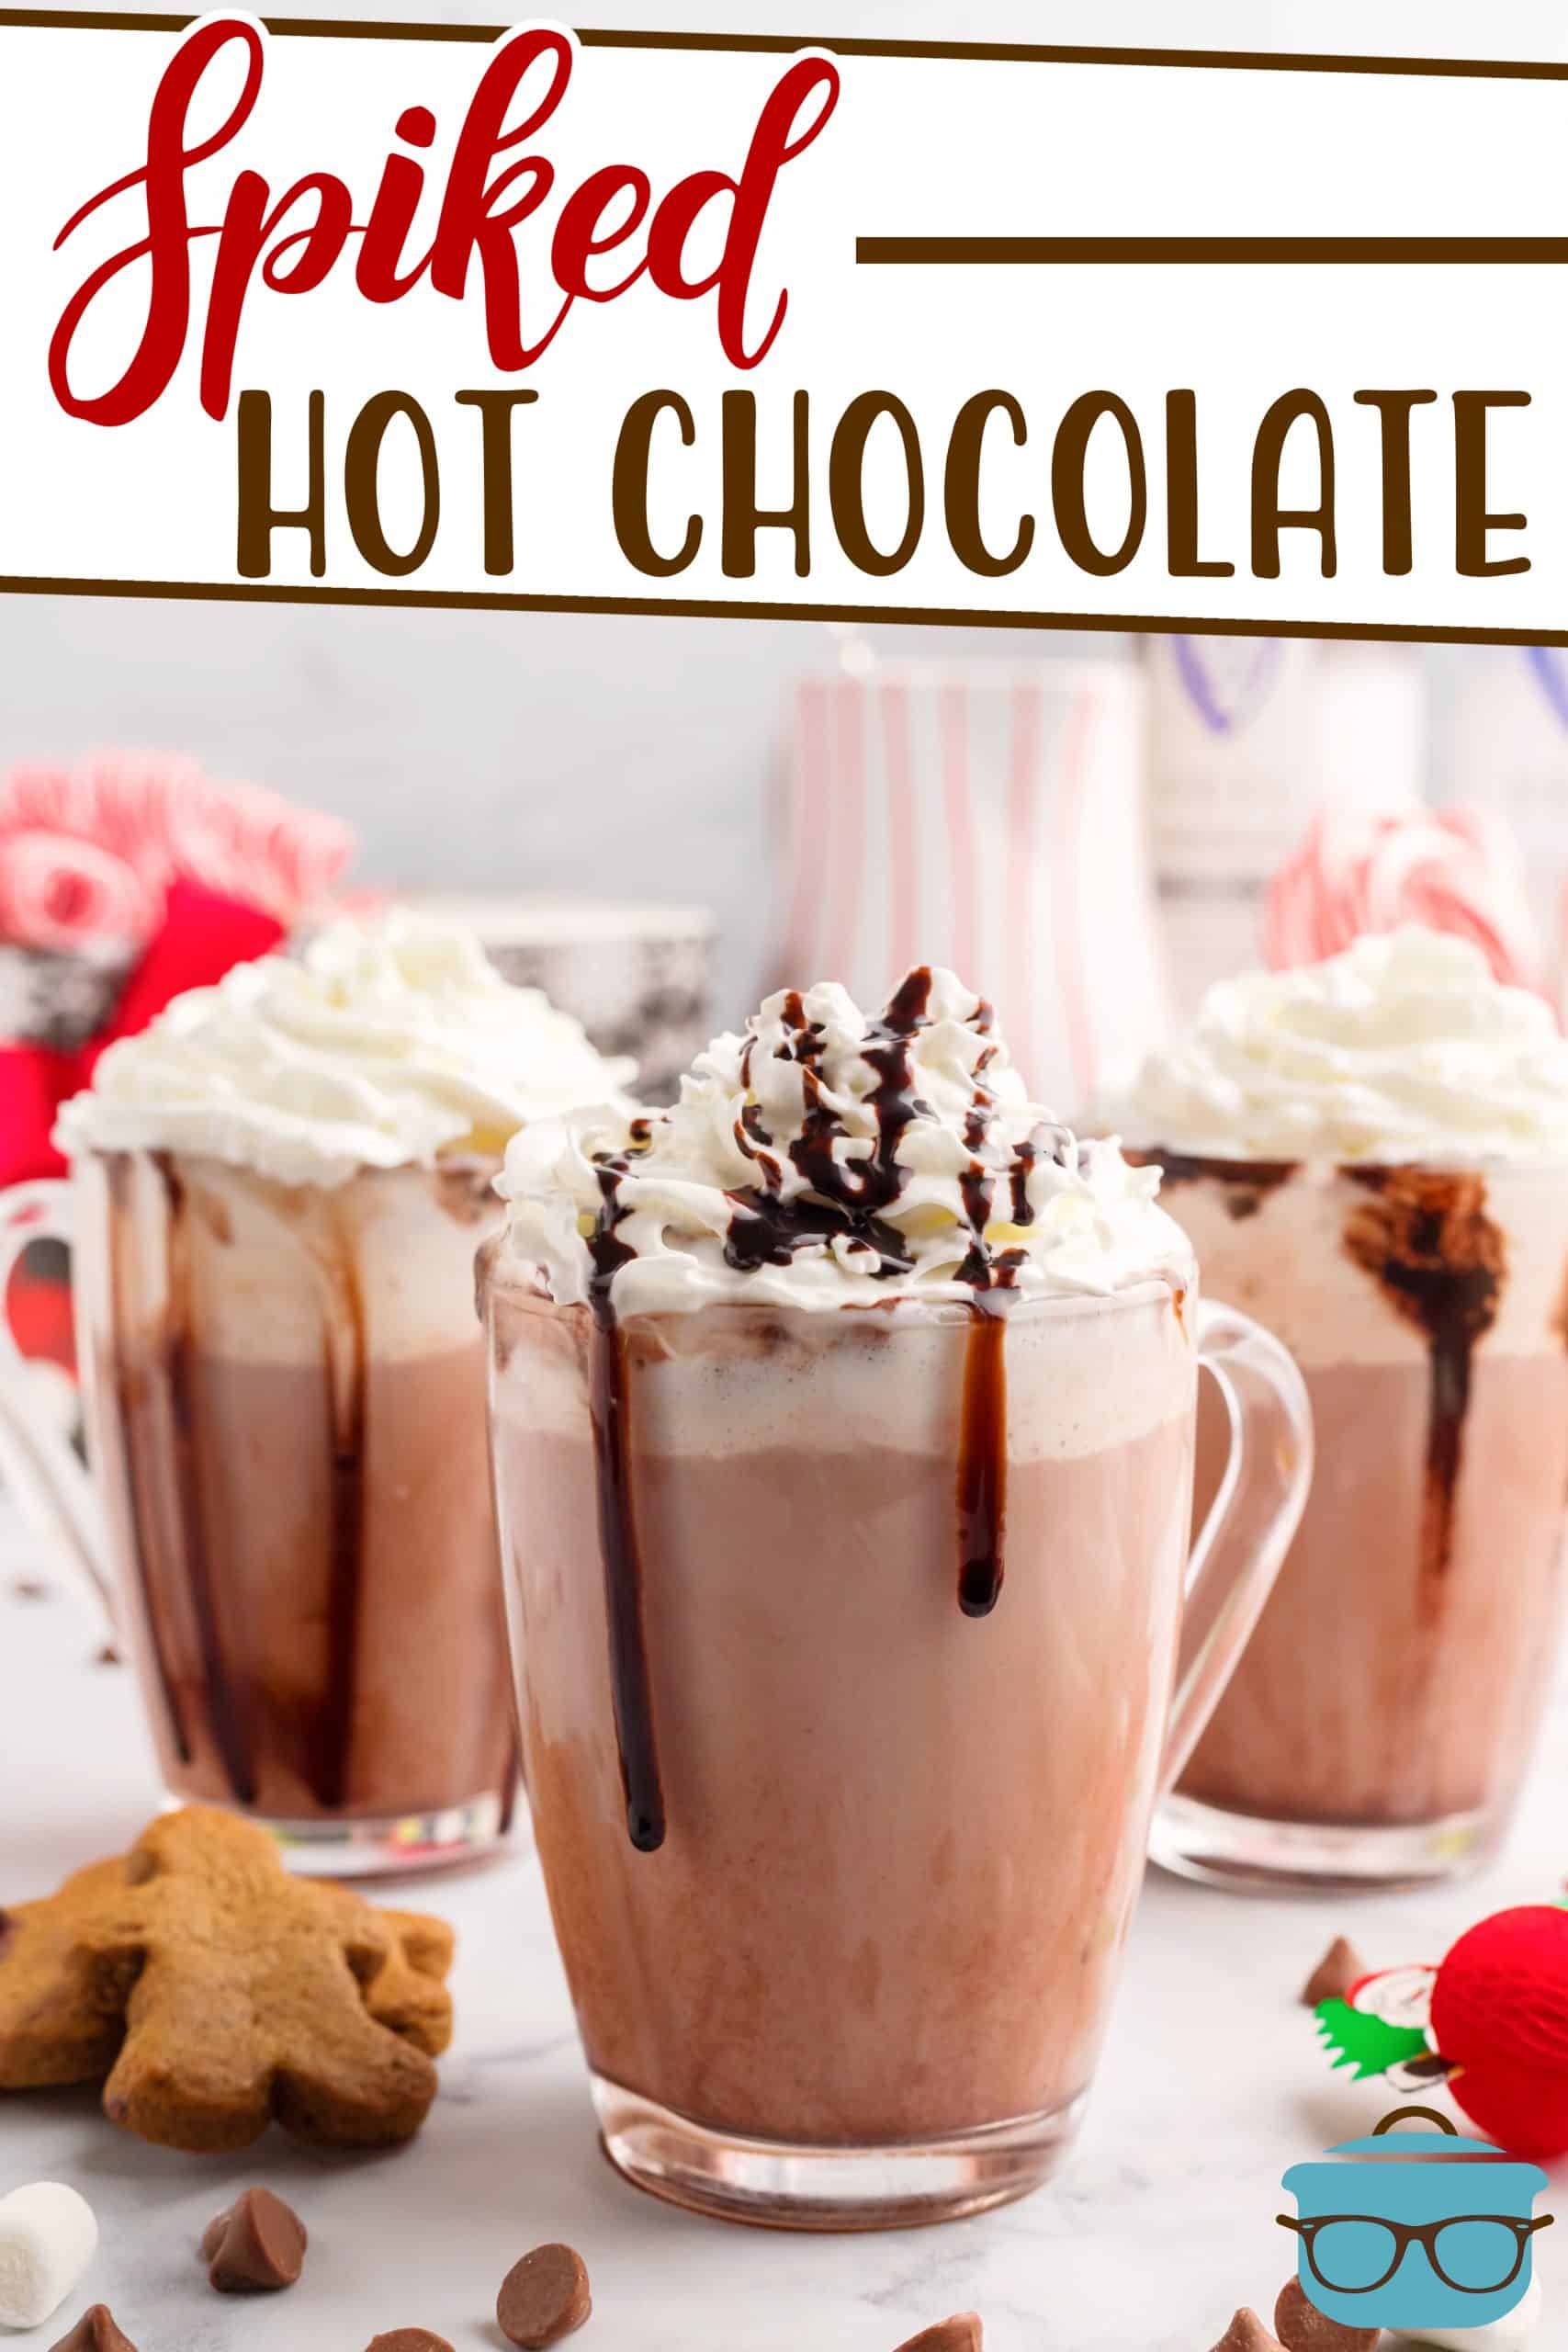 Spiked Hot Chocolate recipe from The Country Cook, hot chocolate shown in clear mugs and topped with whipped cream and drizzles with chocolate syrup.